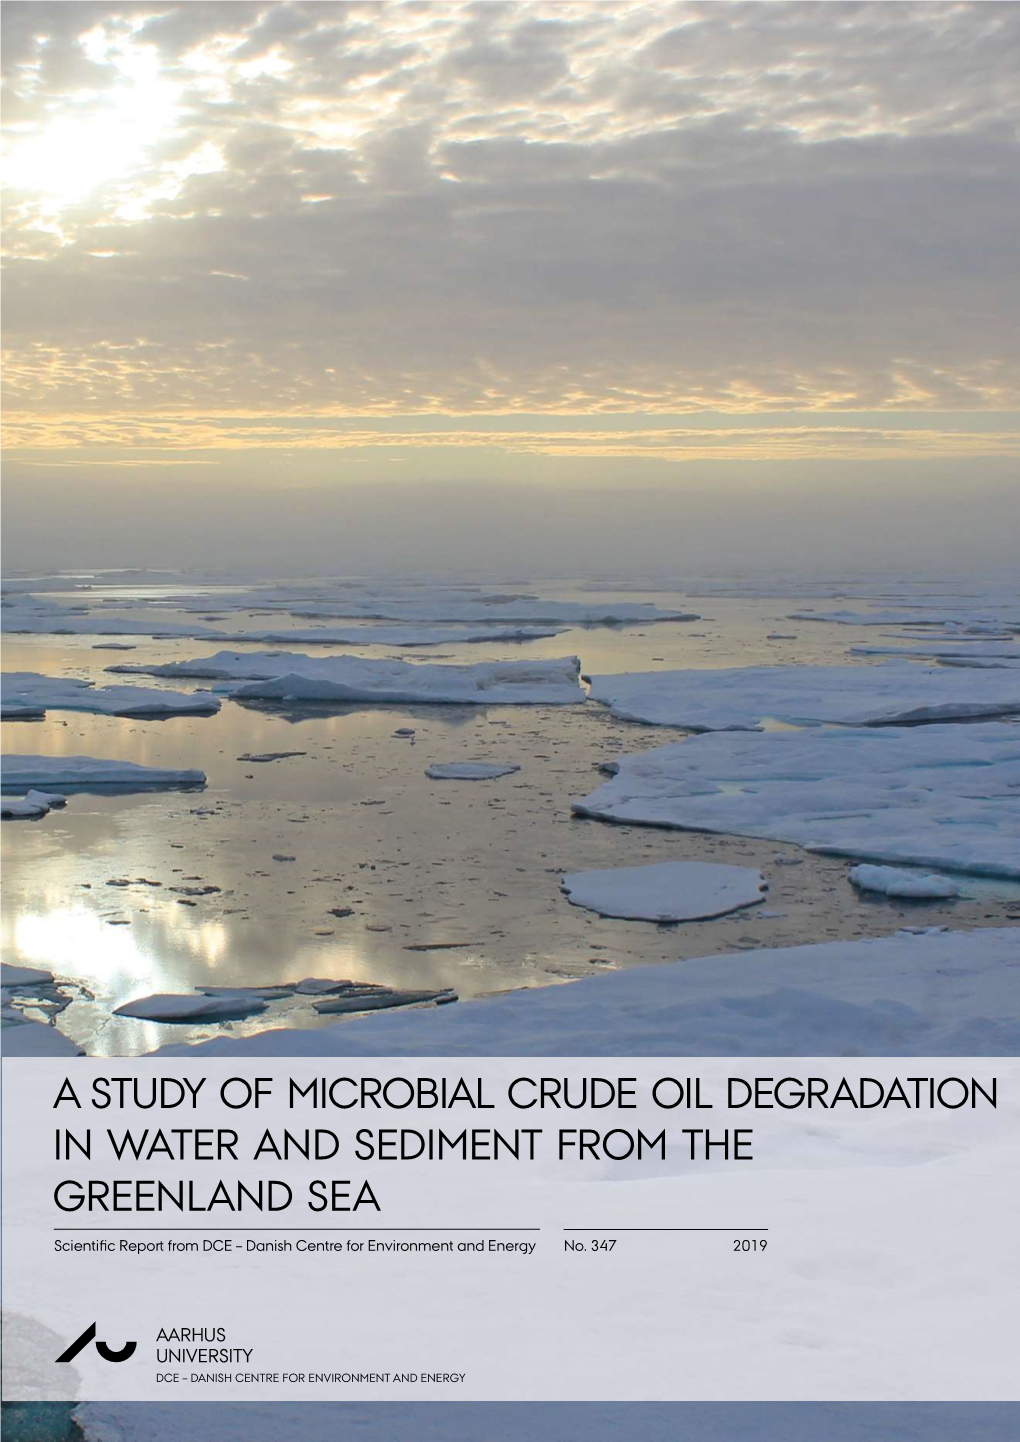 A Study of Microbial Crude Oil Degradation in Water and Sediment from the Greenland Sea